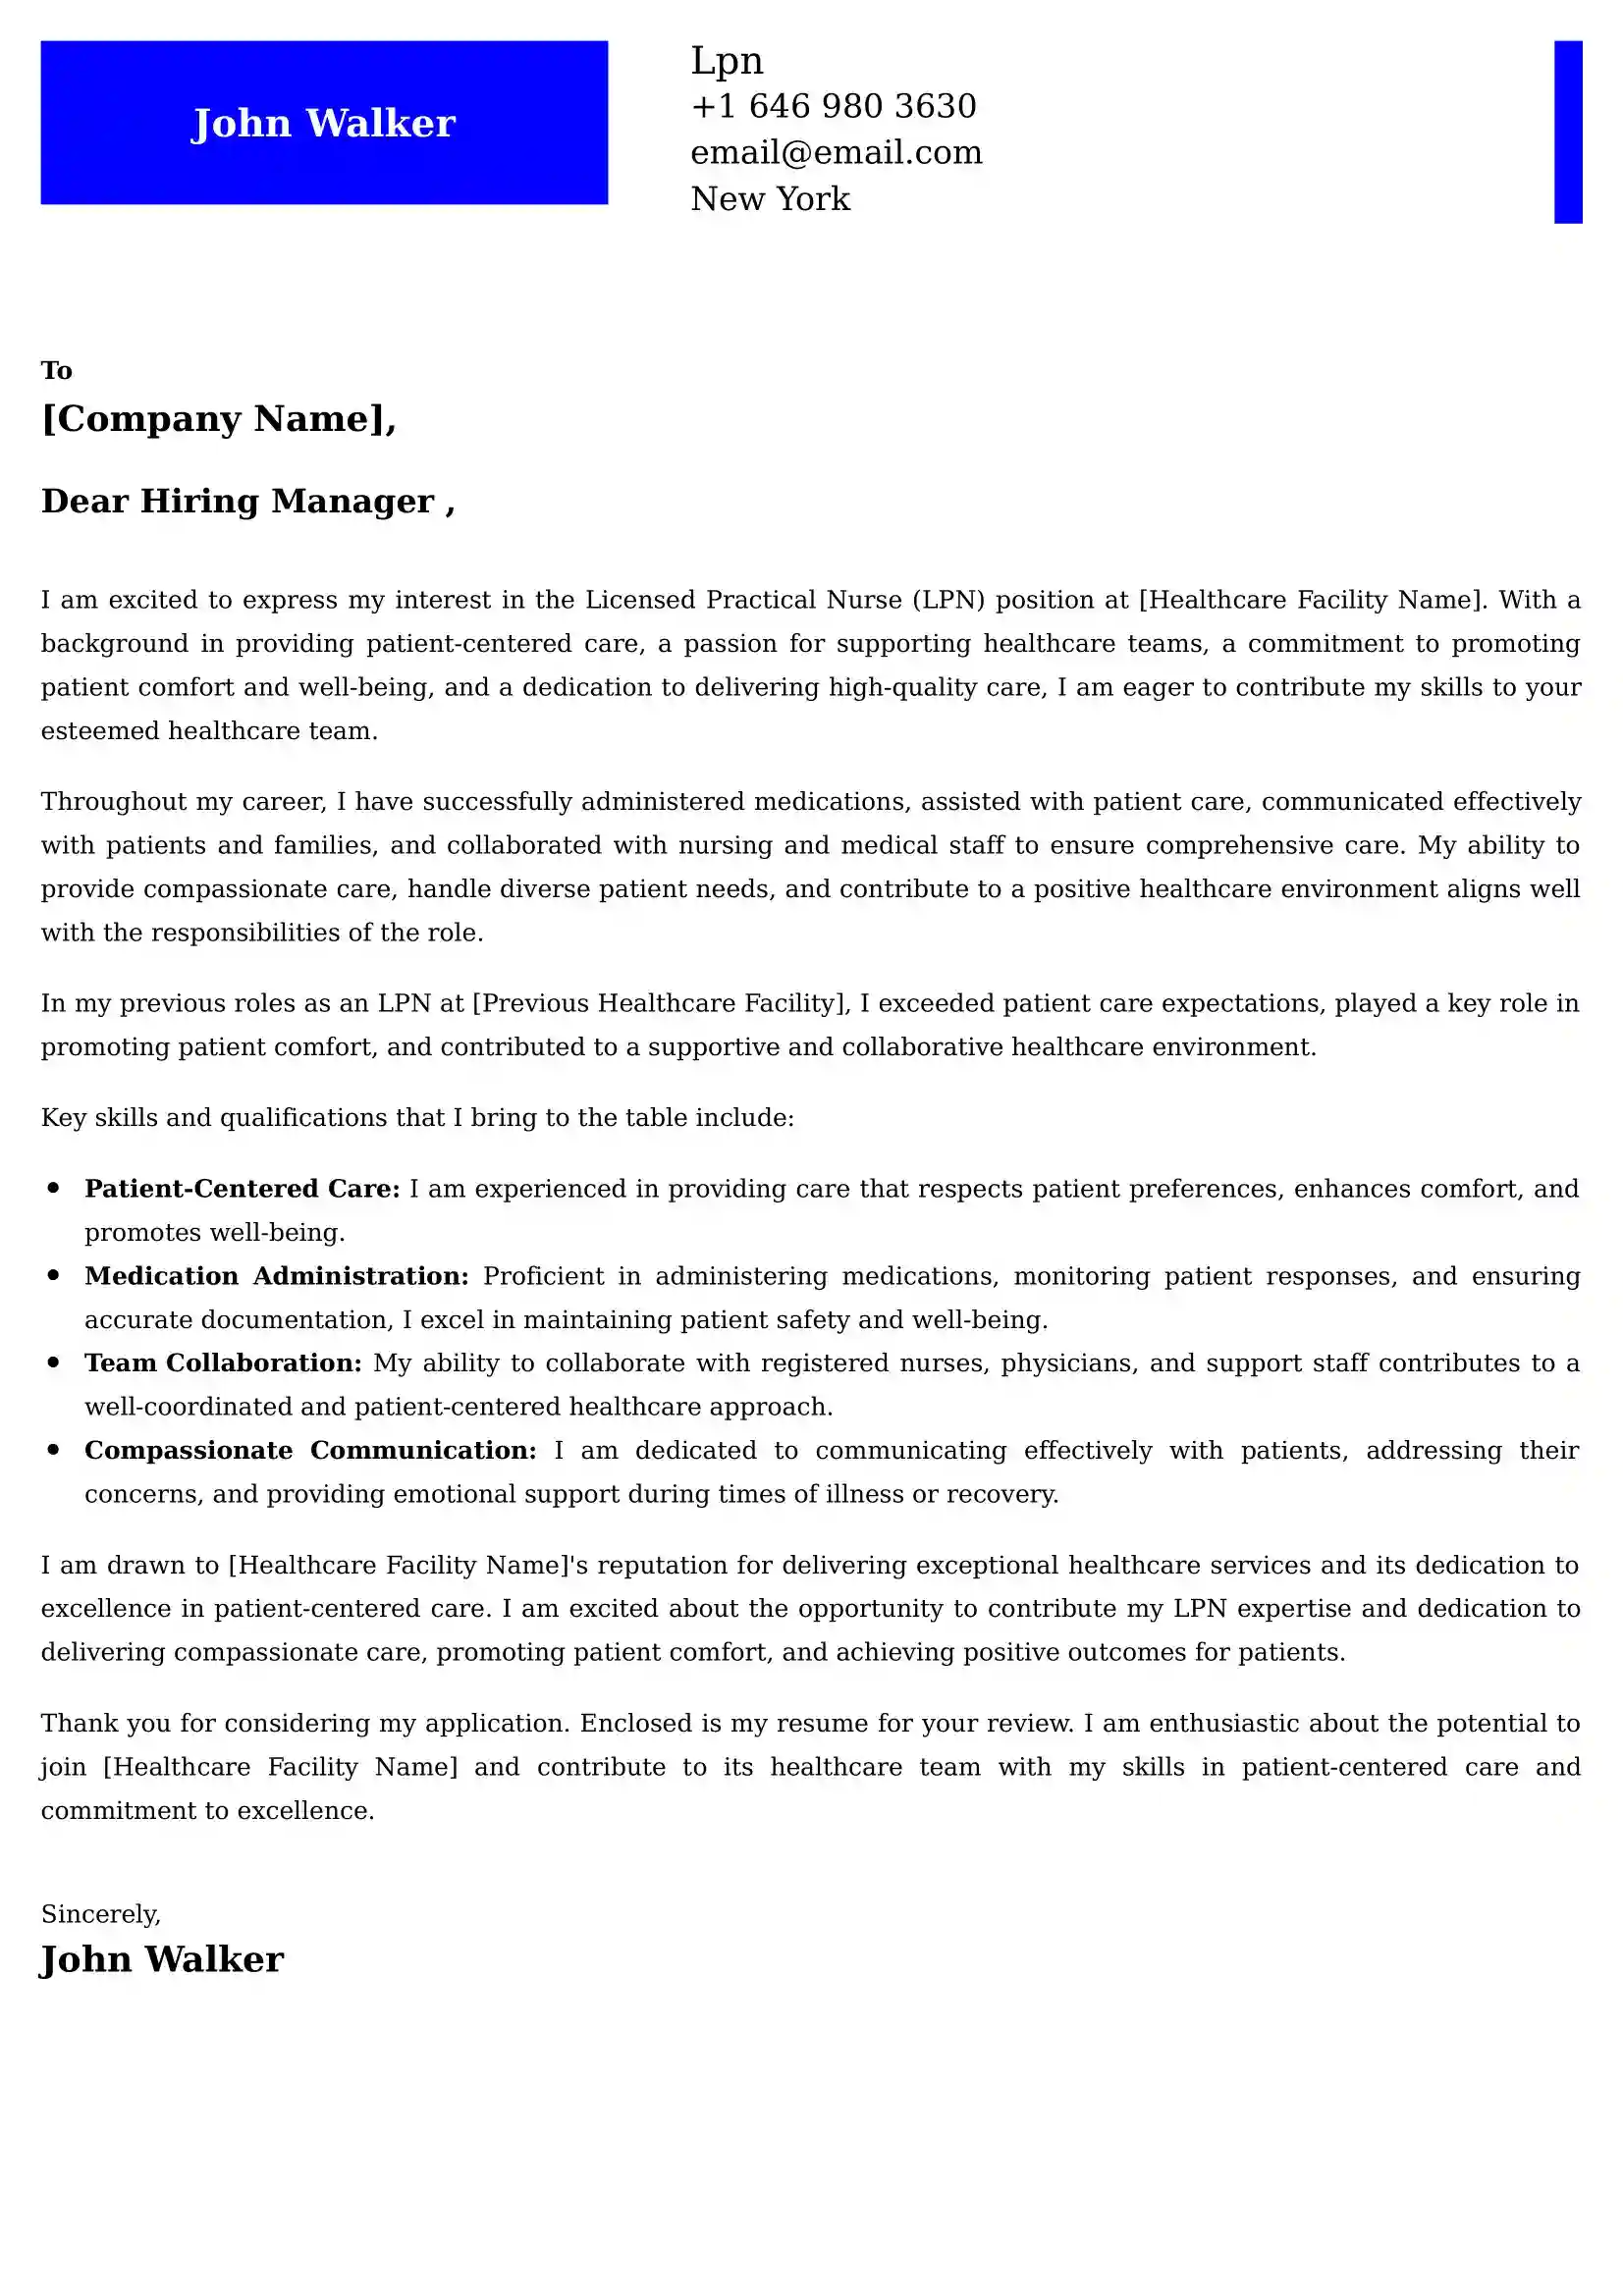 Lpn Cover Letter Examples - Latest UK Format